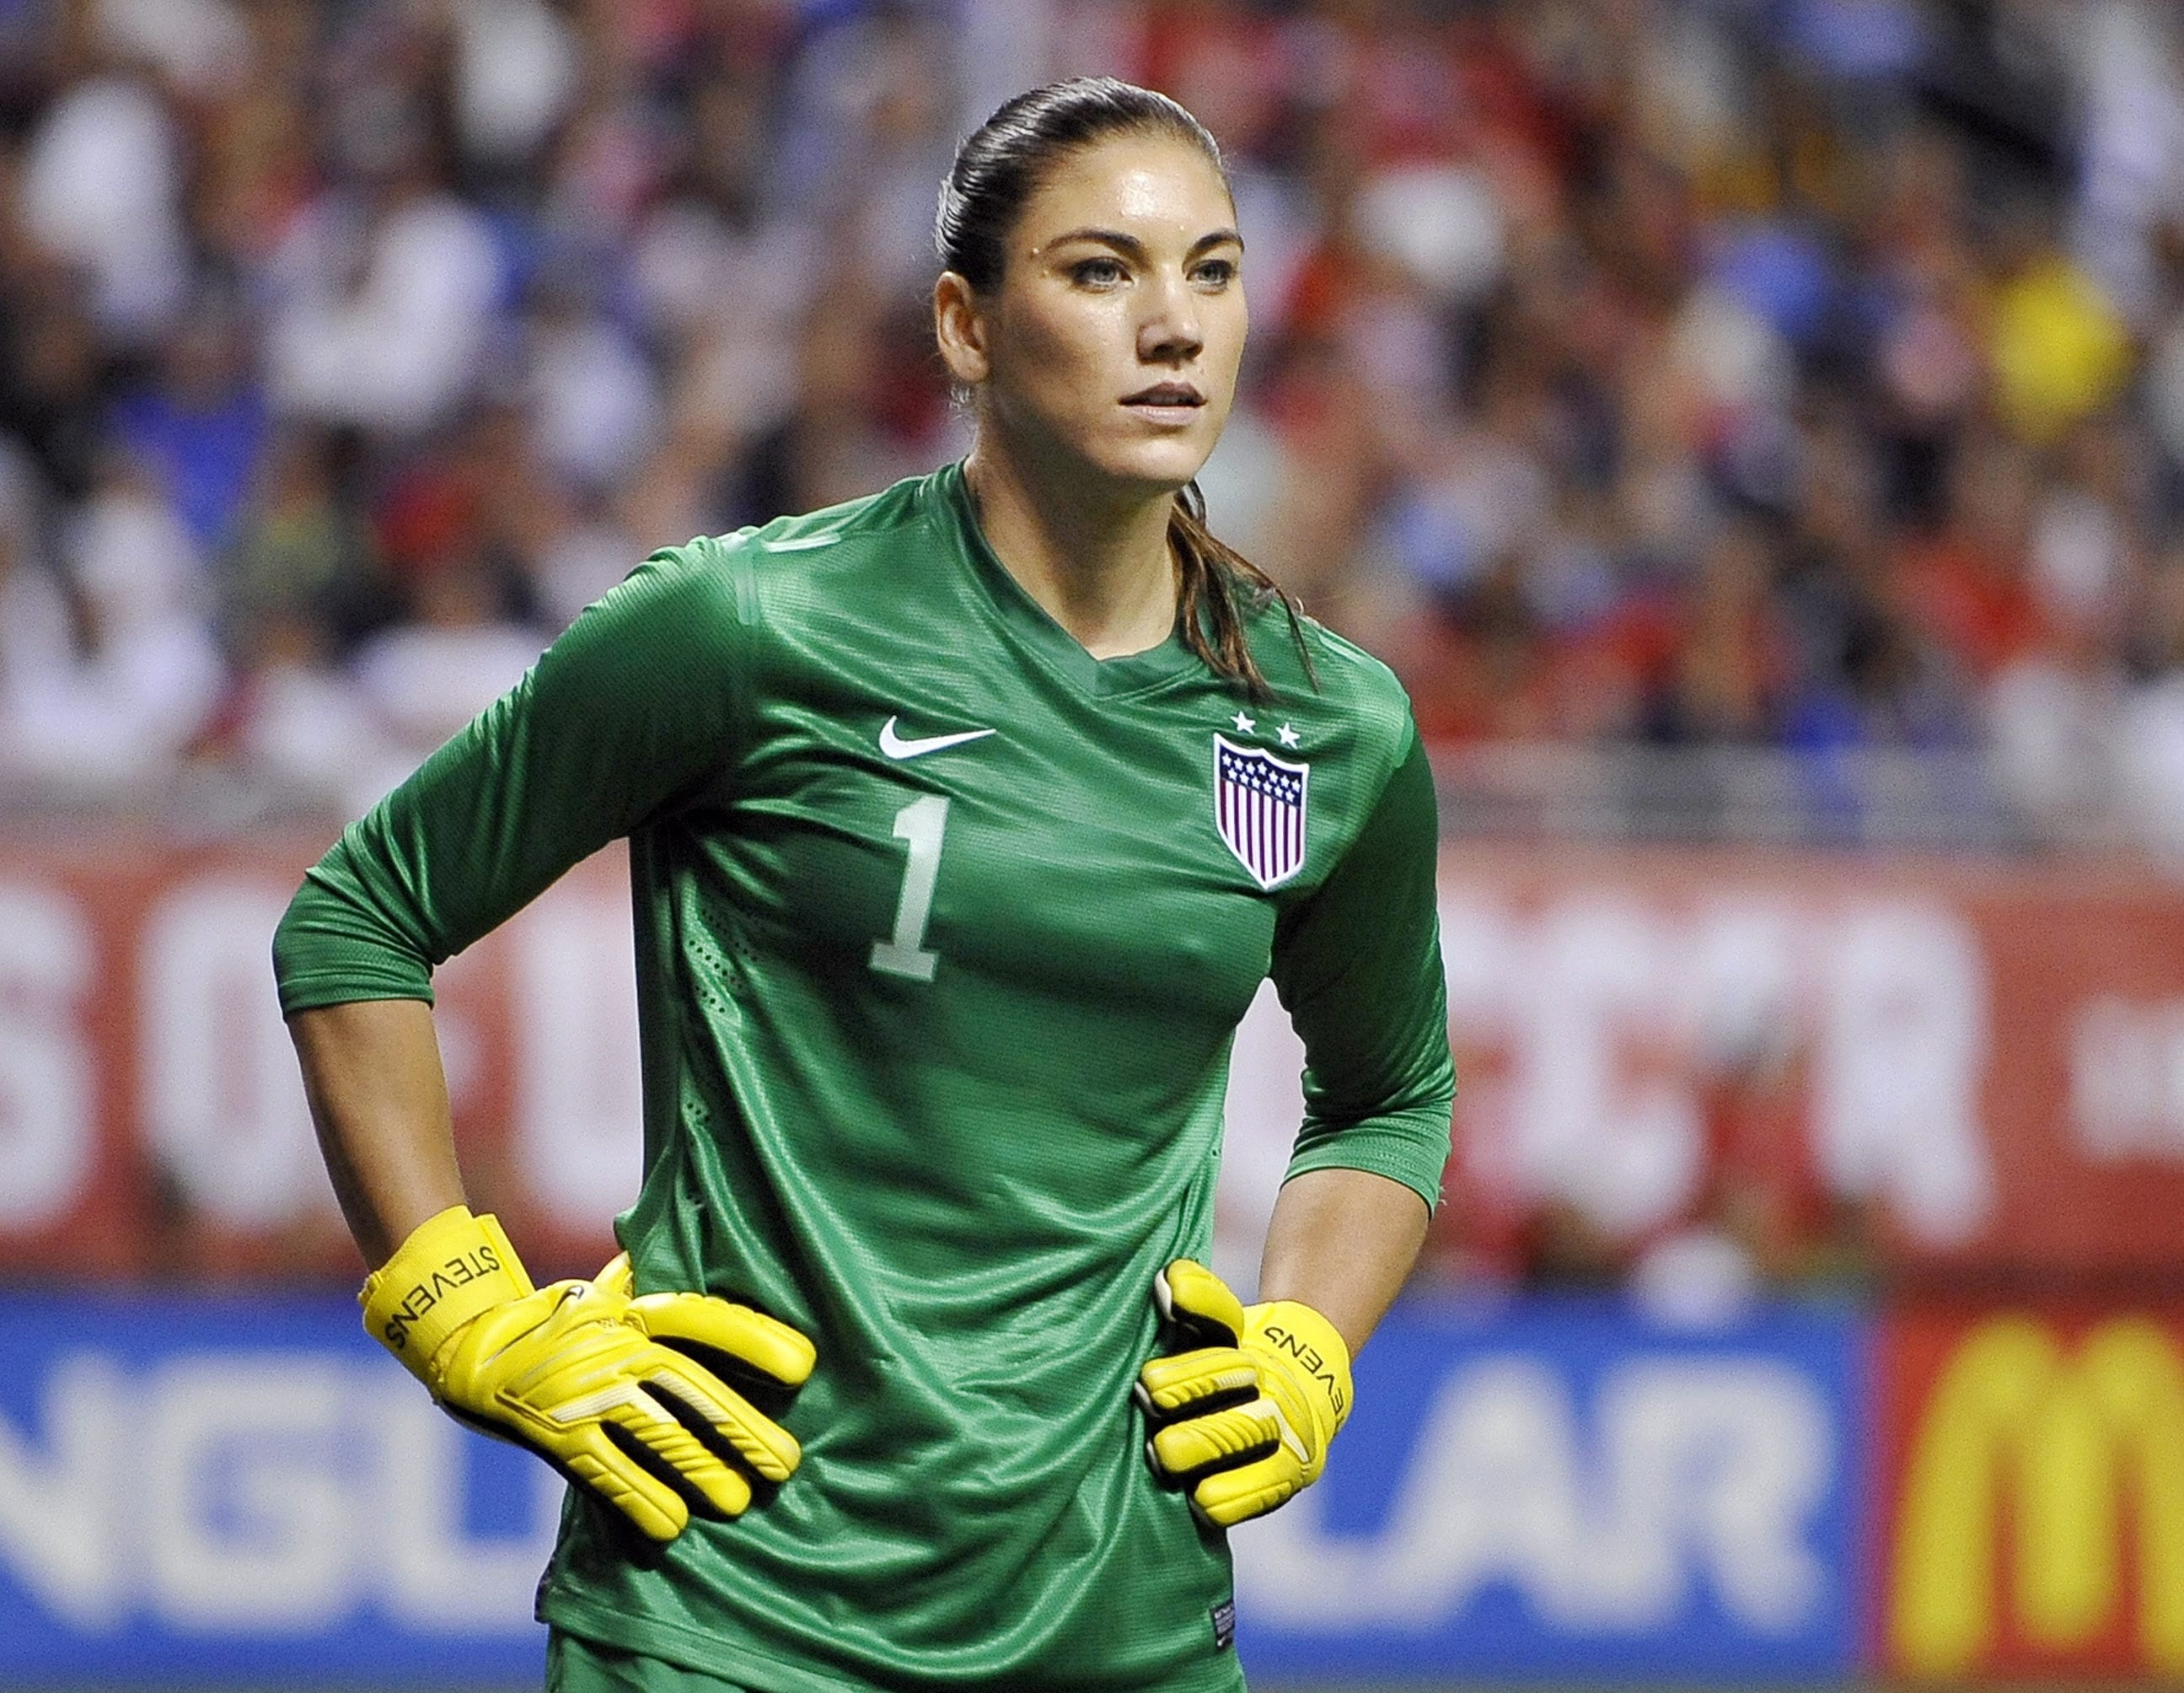 United States goalkeeper Hope Solo pauses on the field during the second half of an international friendly womenu2019s soccer match against Australia on Oct. 20, 2013, in San Antonio.